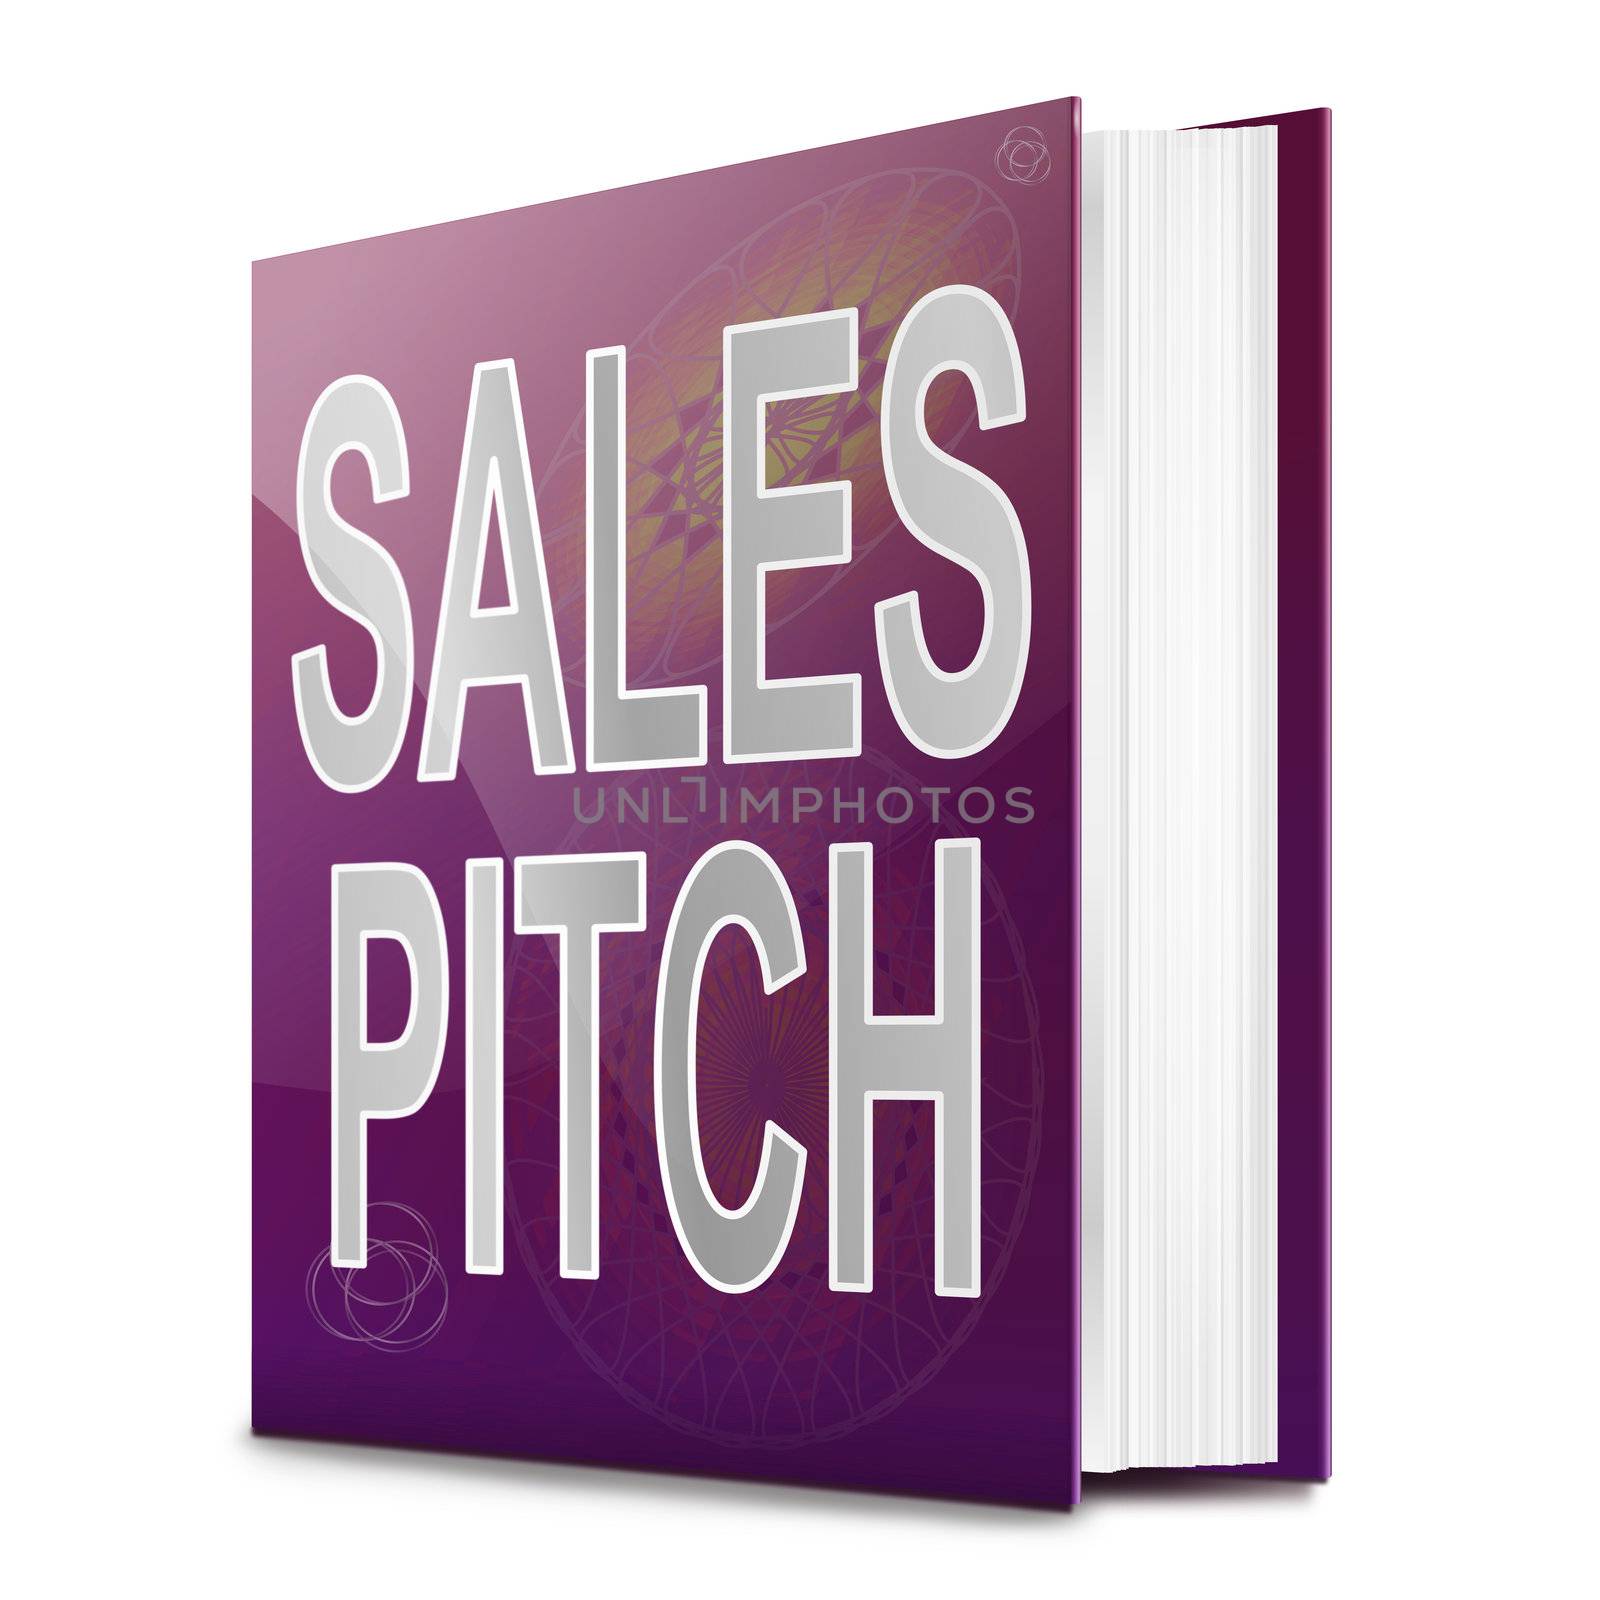 Sales pitch book. by 72soul